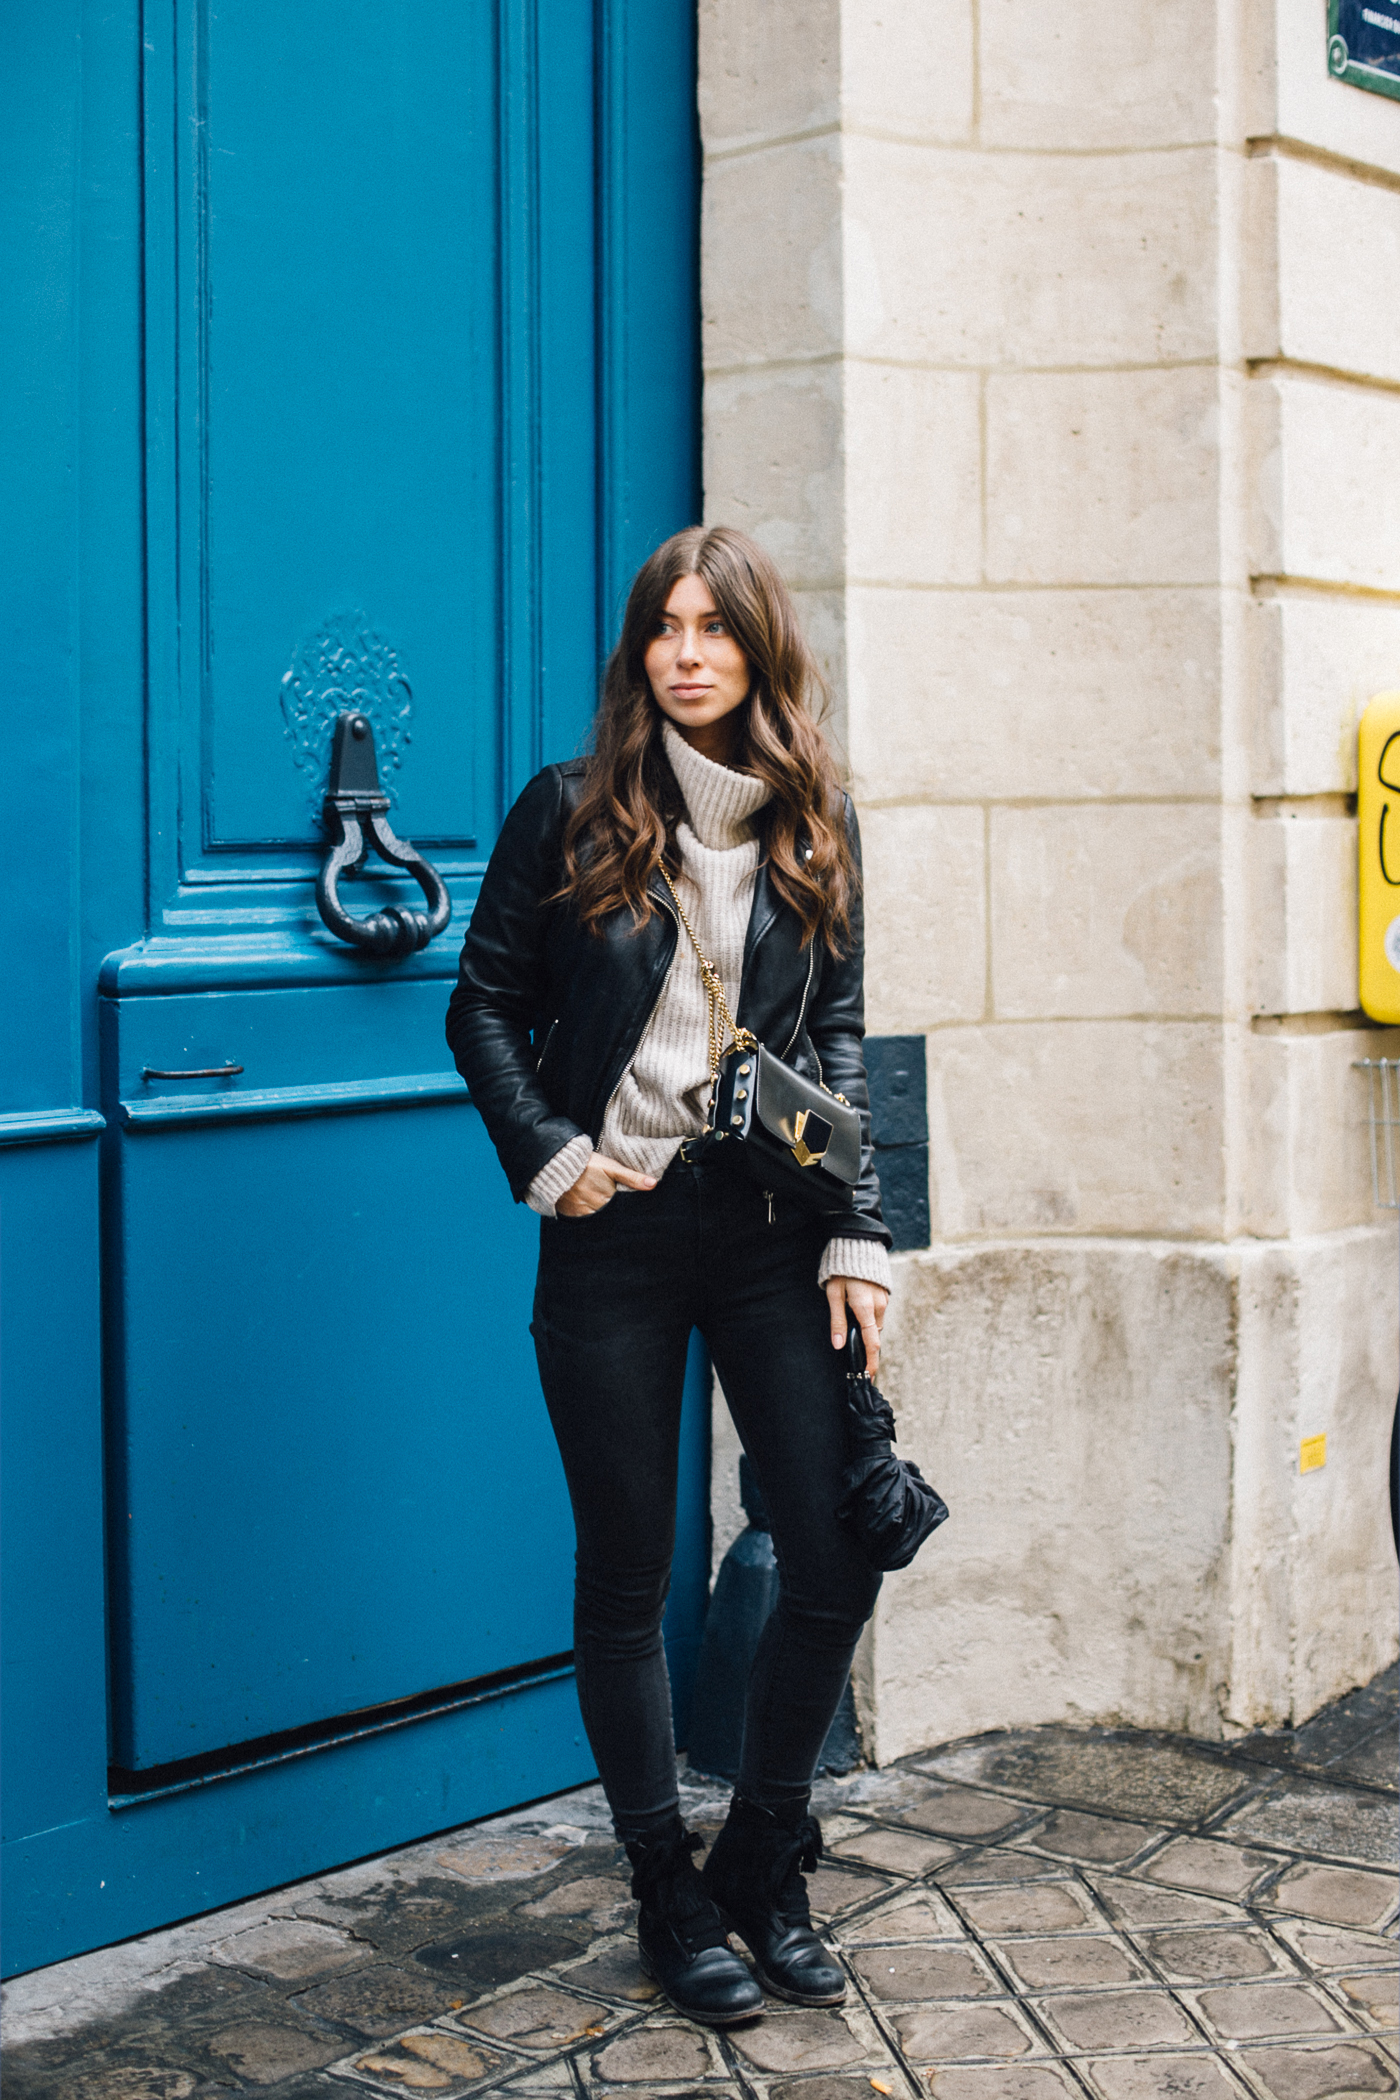 Rainy Days in Paris Outfit | Love Daily Dose